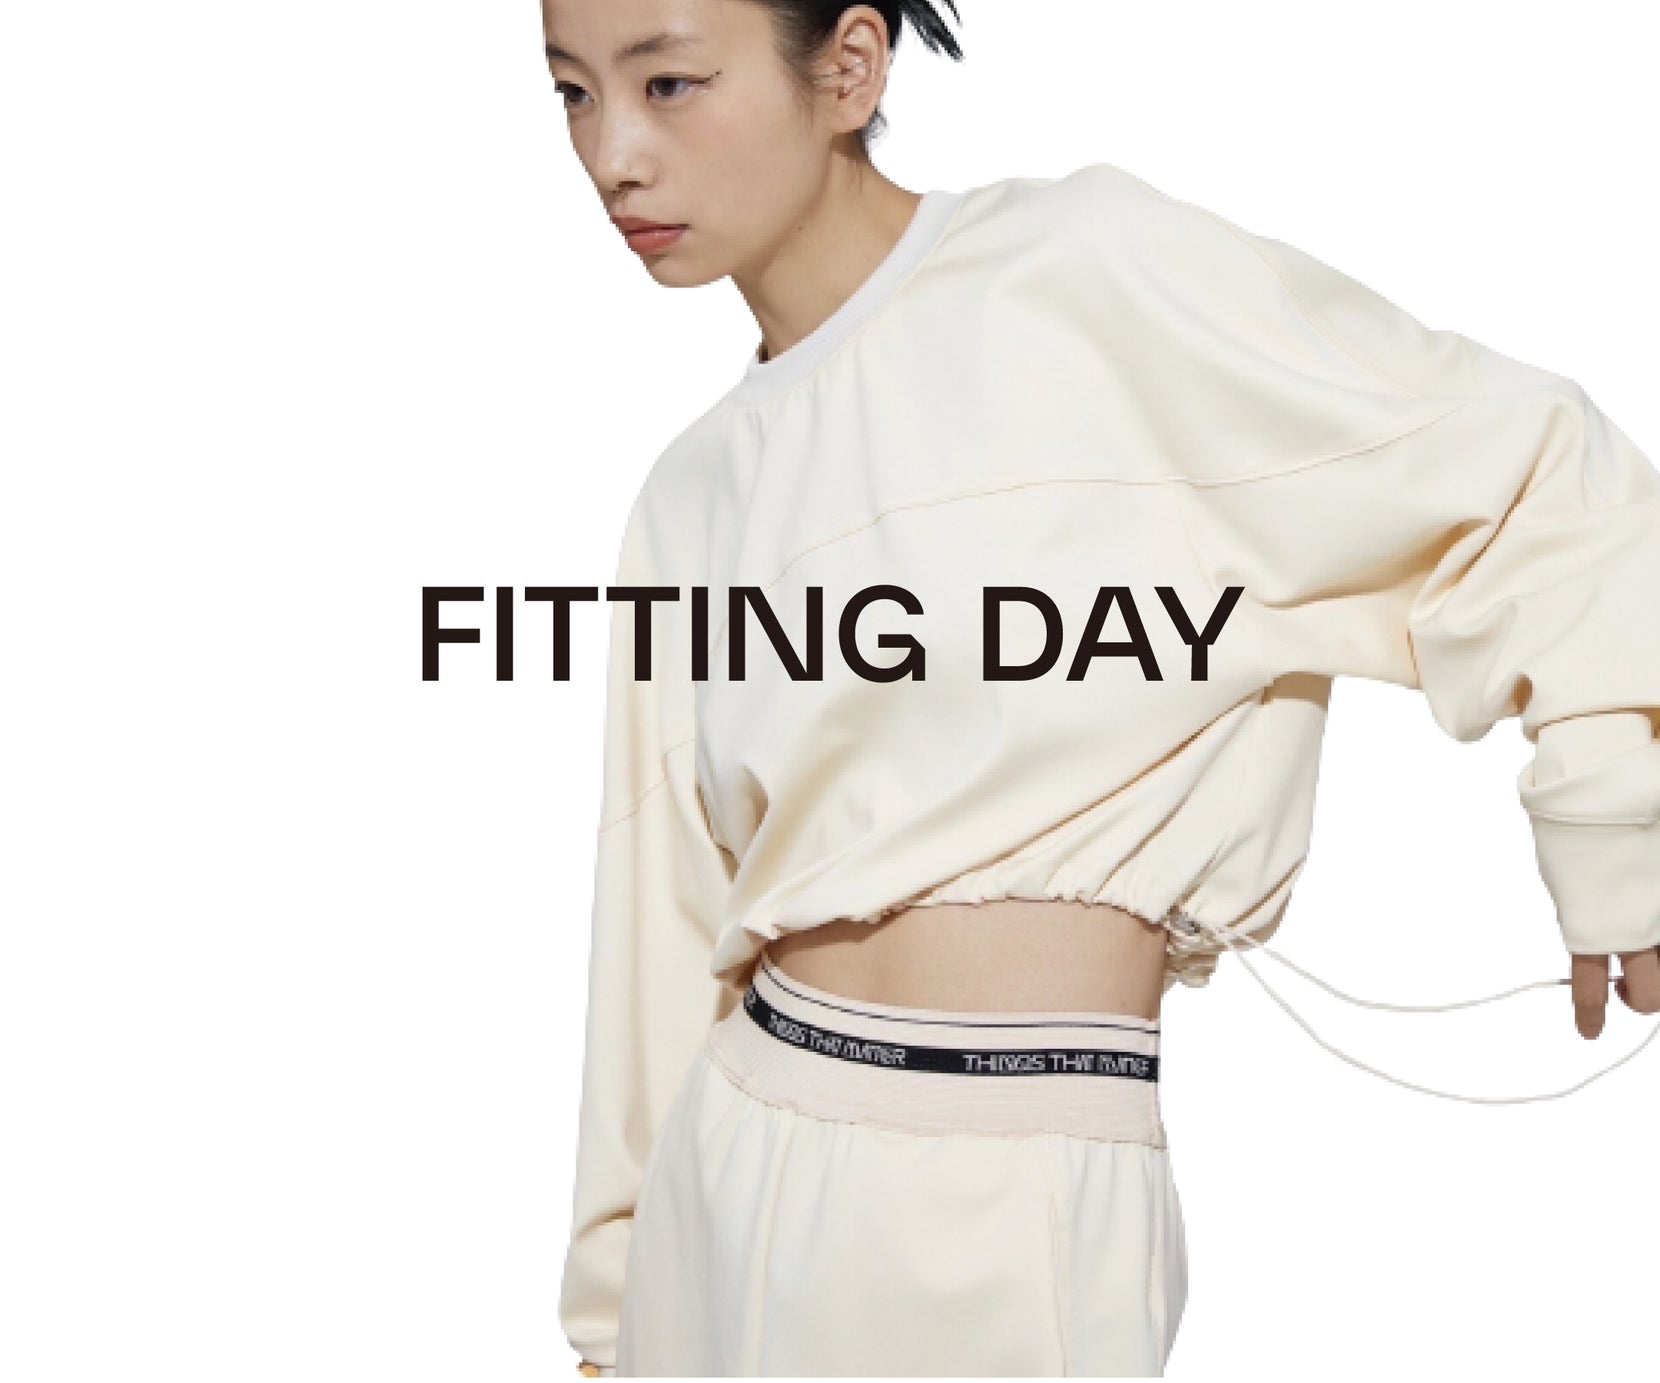 FITTING DAY<BR>11/22(TUE) - 23(WED)<br>IN 原宿